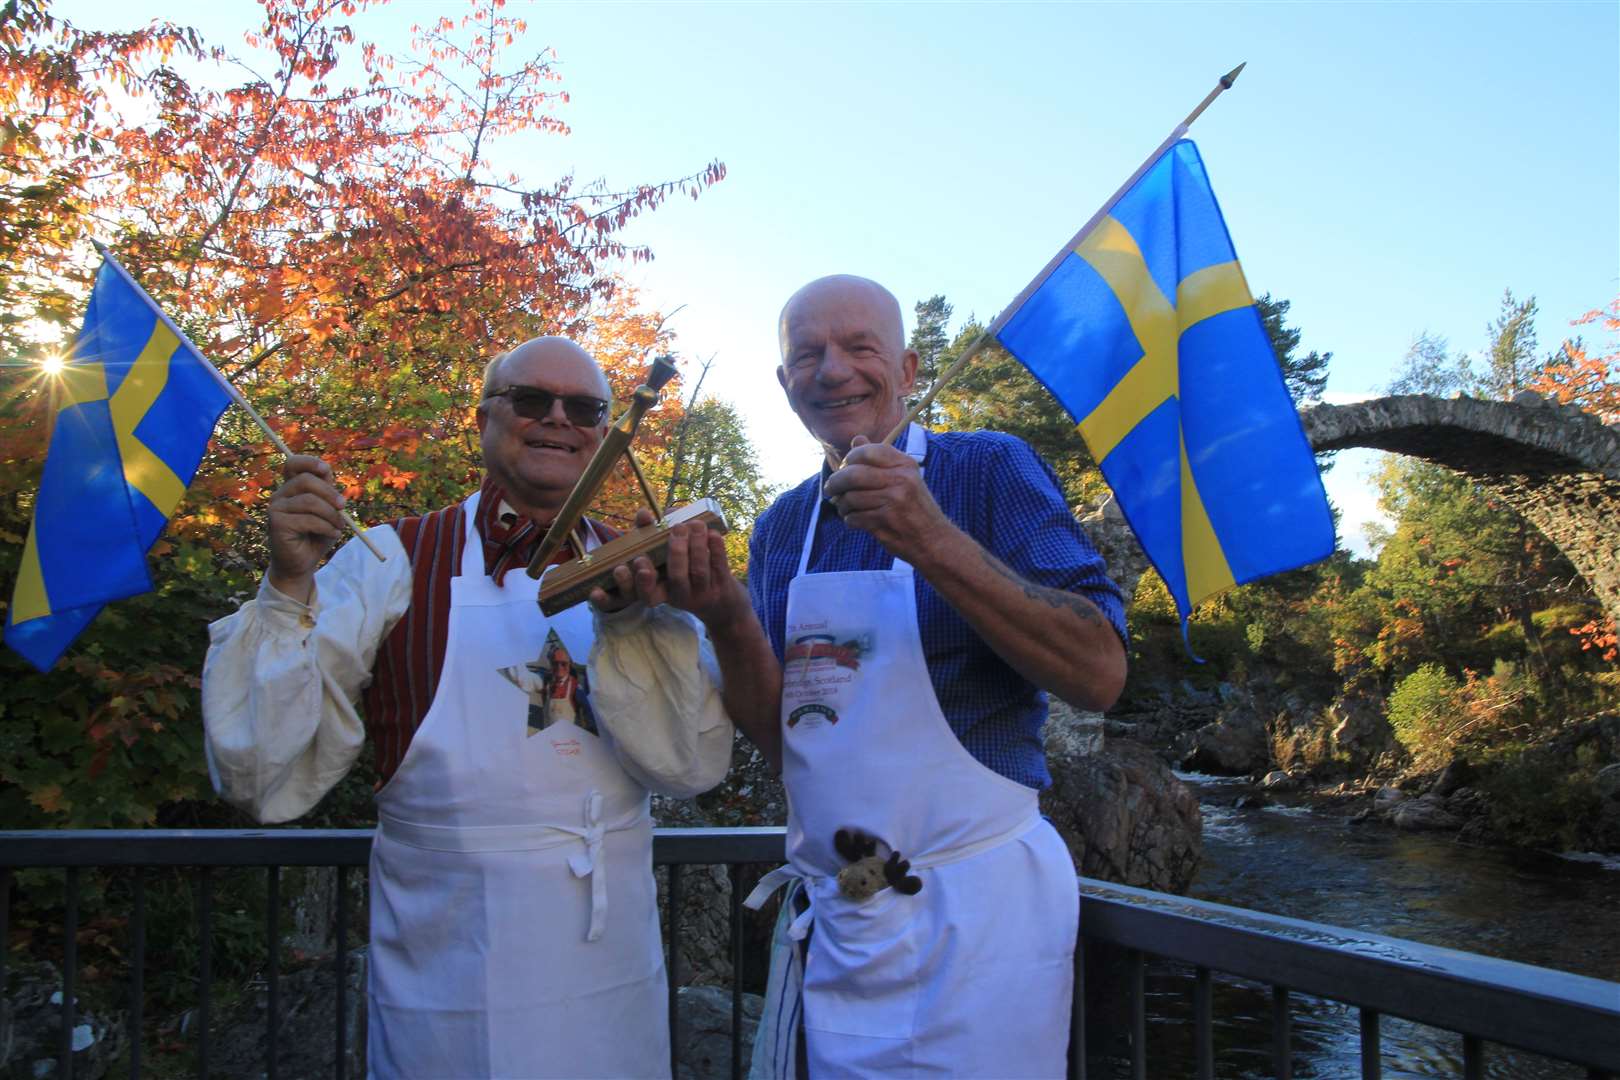 Last year's joint winners, Calle Myrsell and Per Carlsson, will be among the international competitors again this year.